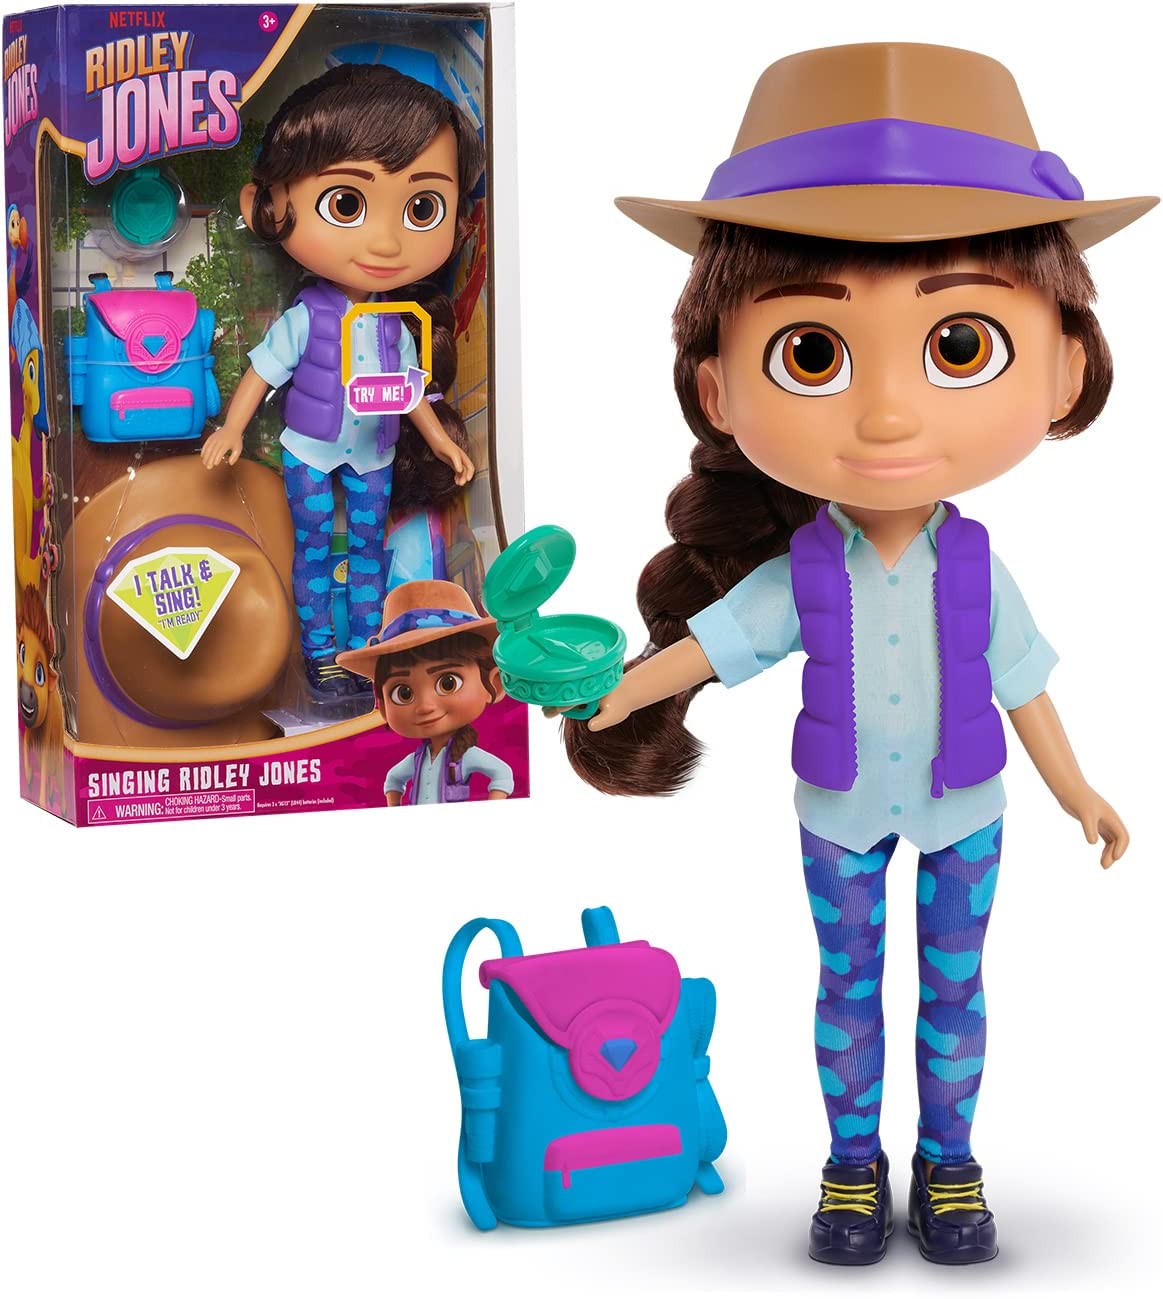 10" Just Play Netflix Ridley Jones Singing Doll w/ Removable Outfit & Accessories $7.35 + Free Shipping w/ Prime or on $25+